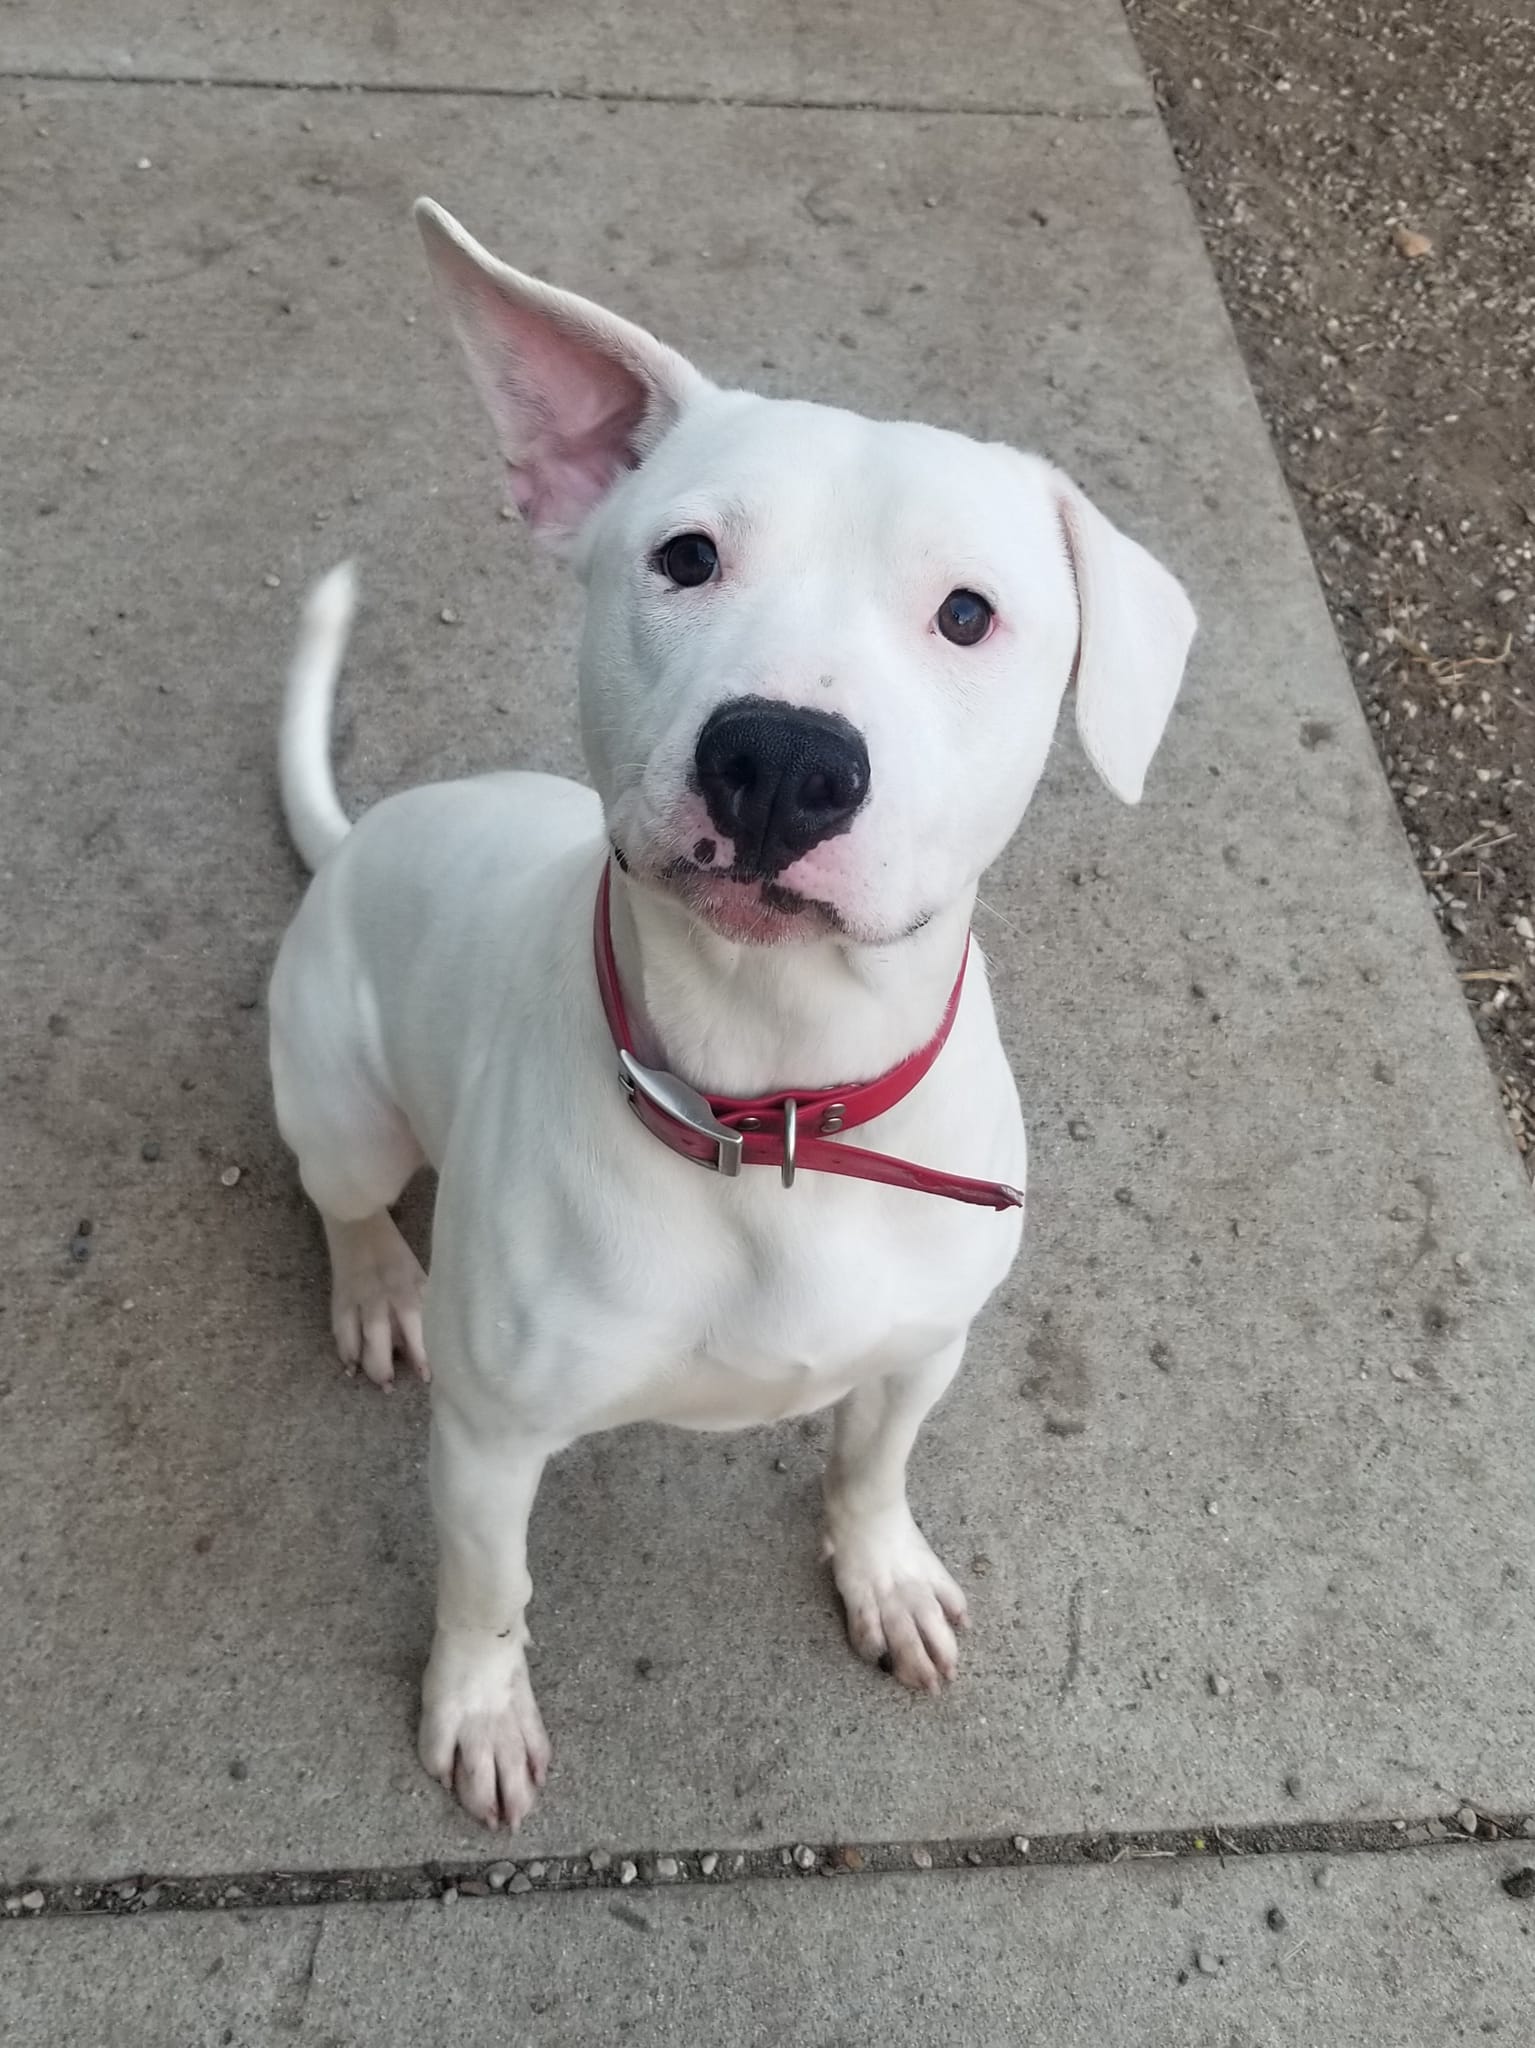 Pet of the Week: Olaf is white pit bull terrier